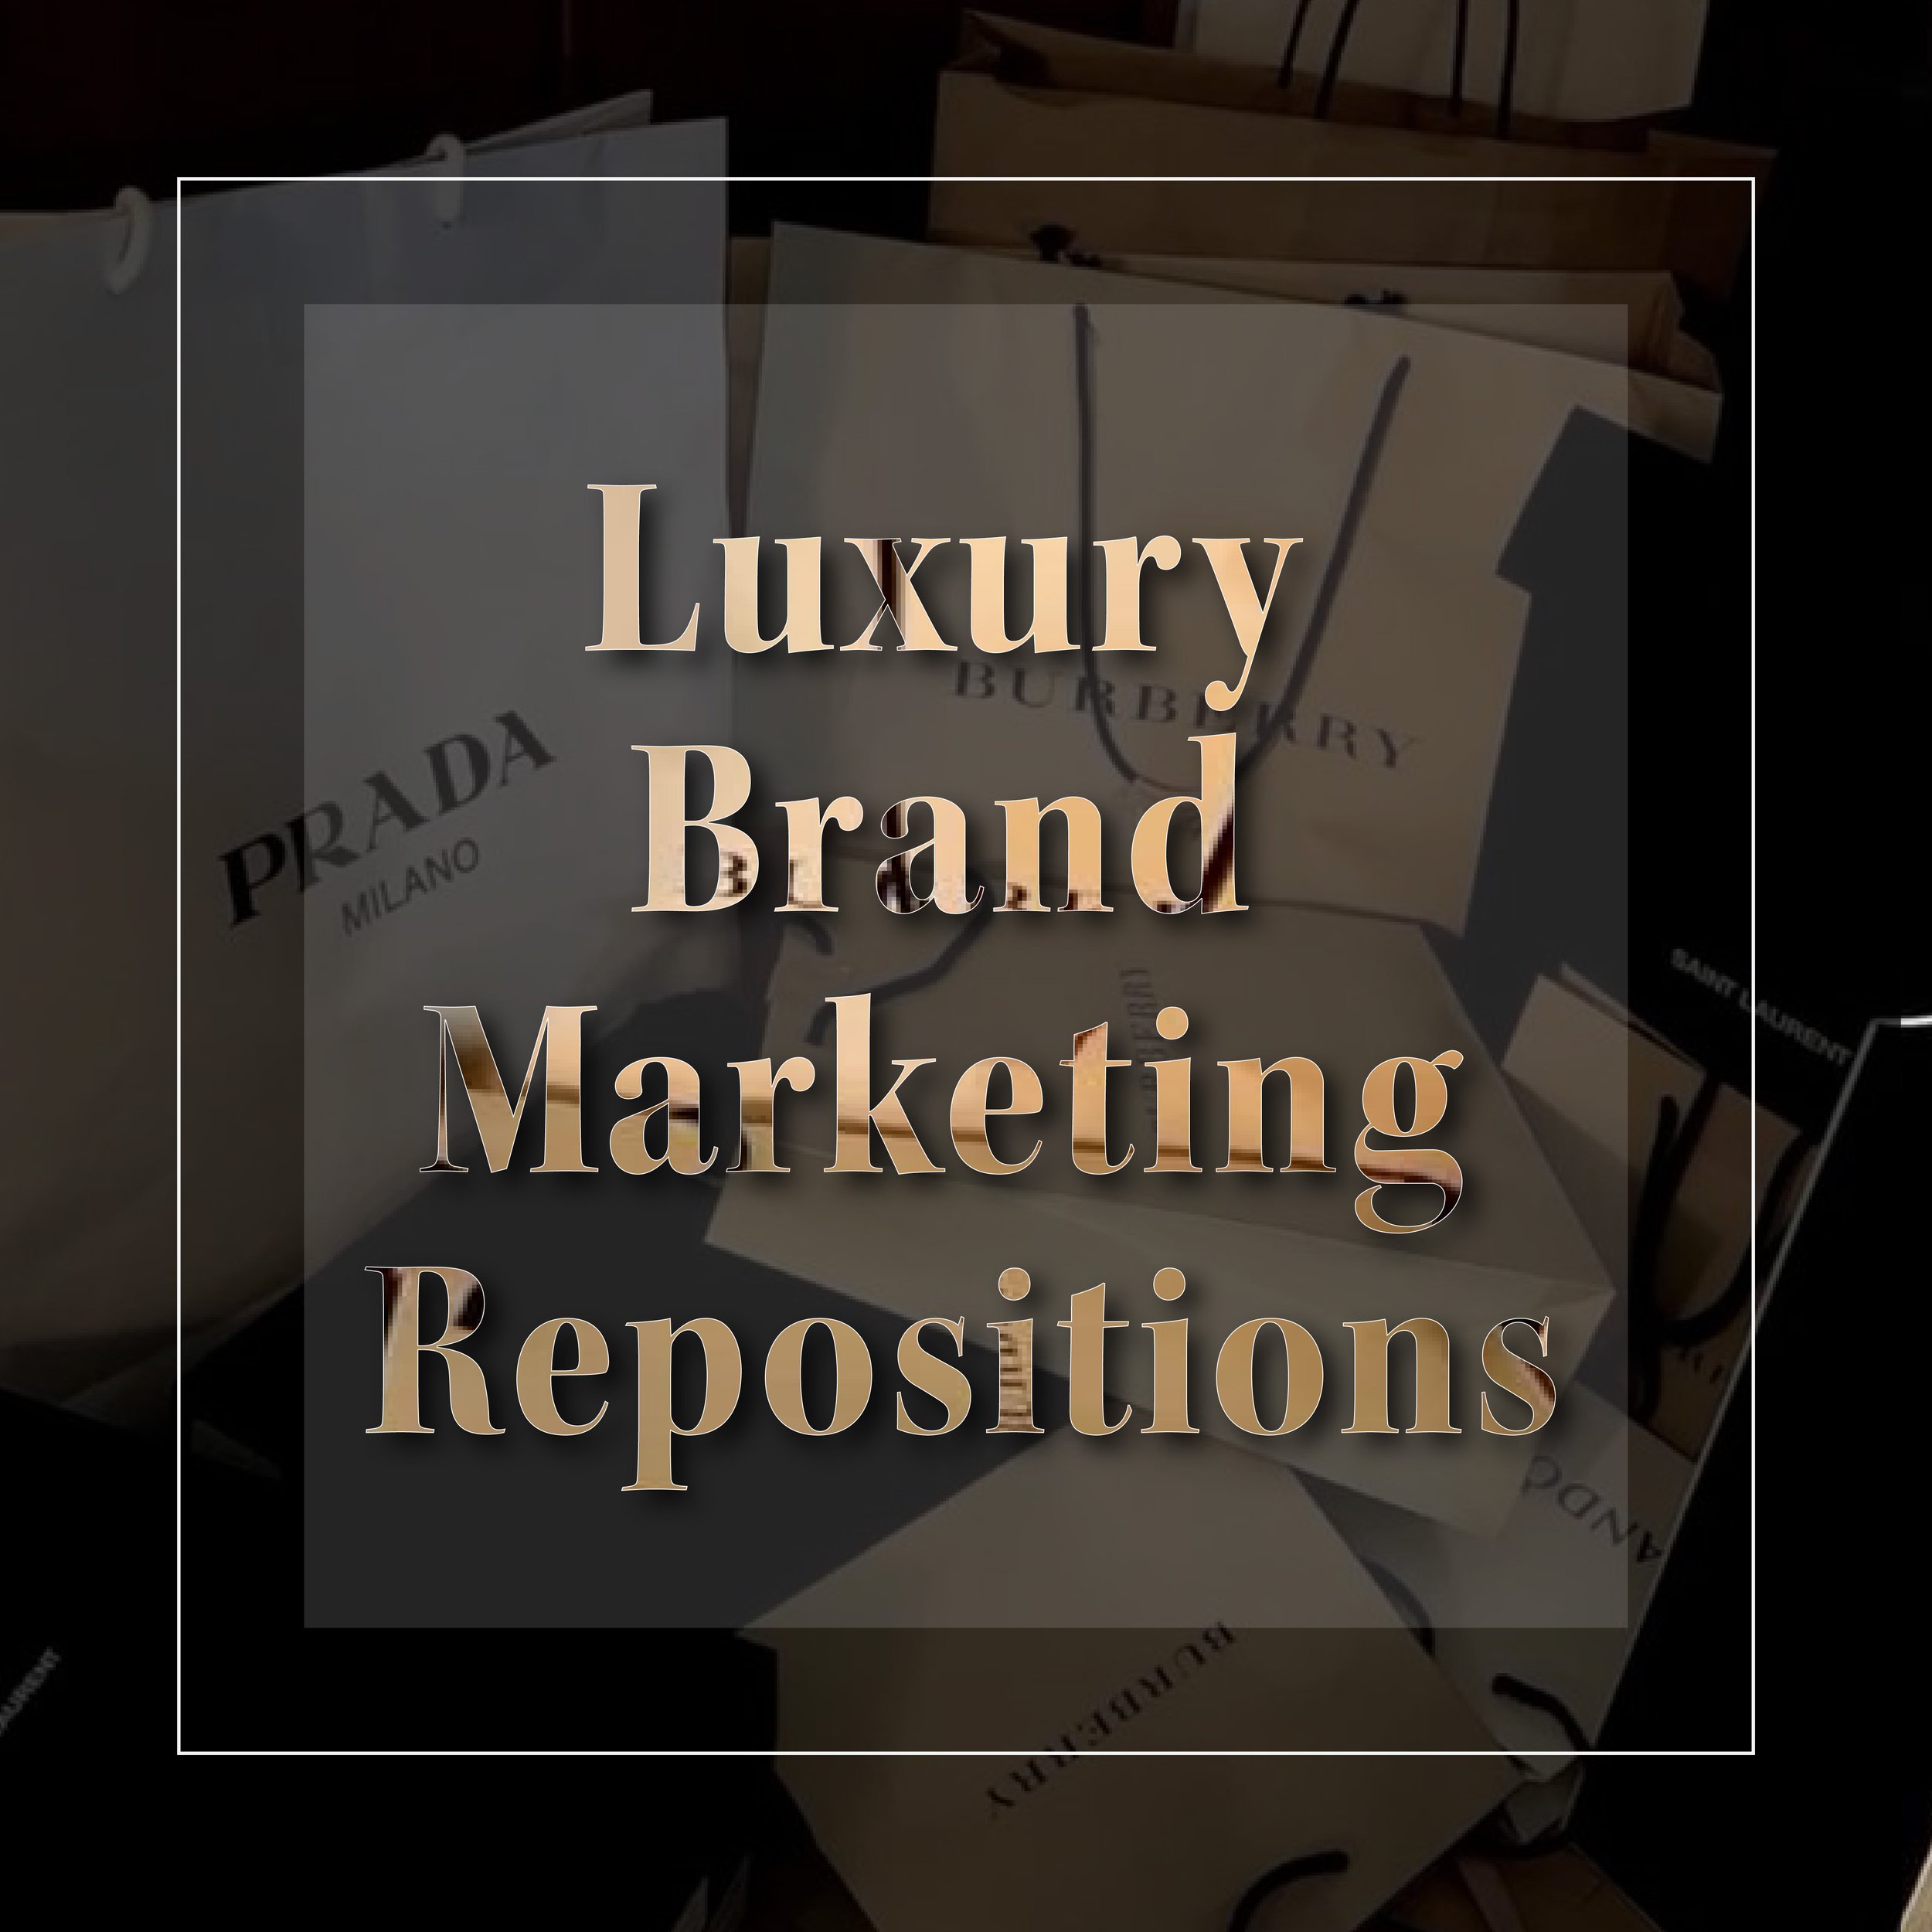 Vintage Luxury Brands Lurch into Modernity with Marketing